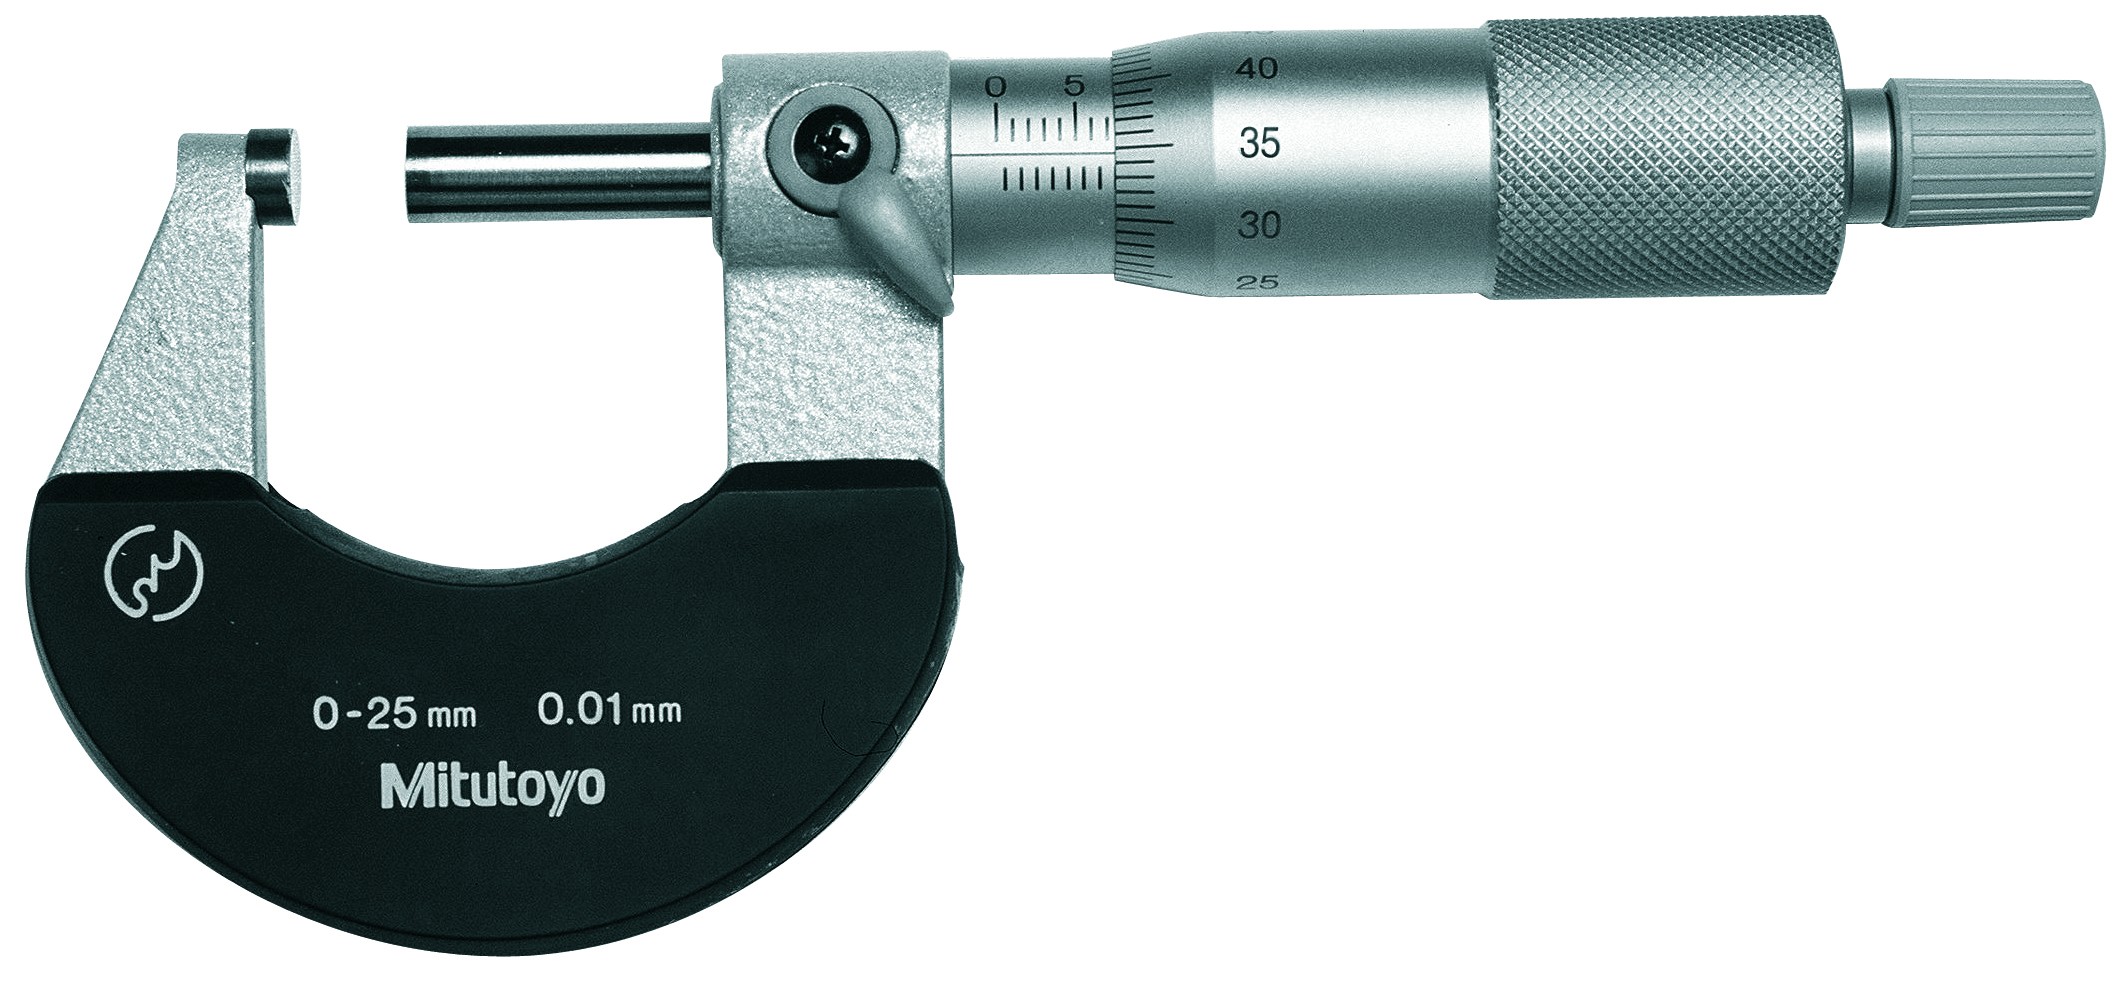 Buy 0/25mm Outside Micrometer with ratchet stop